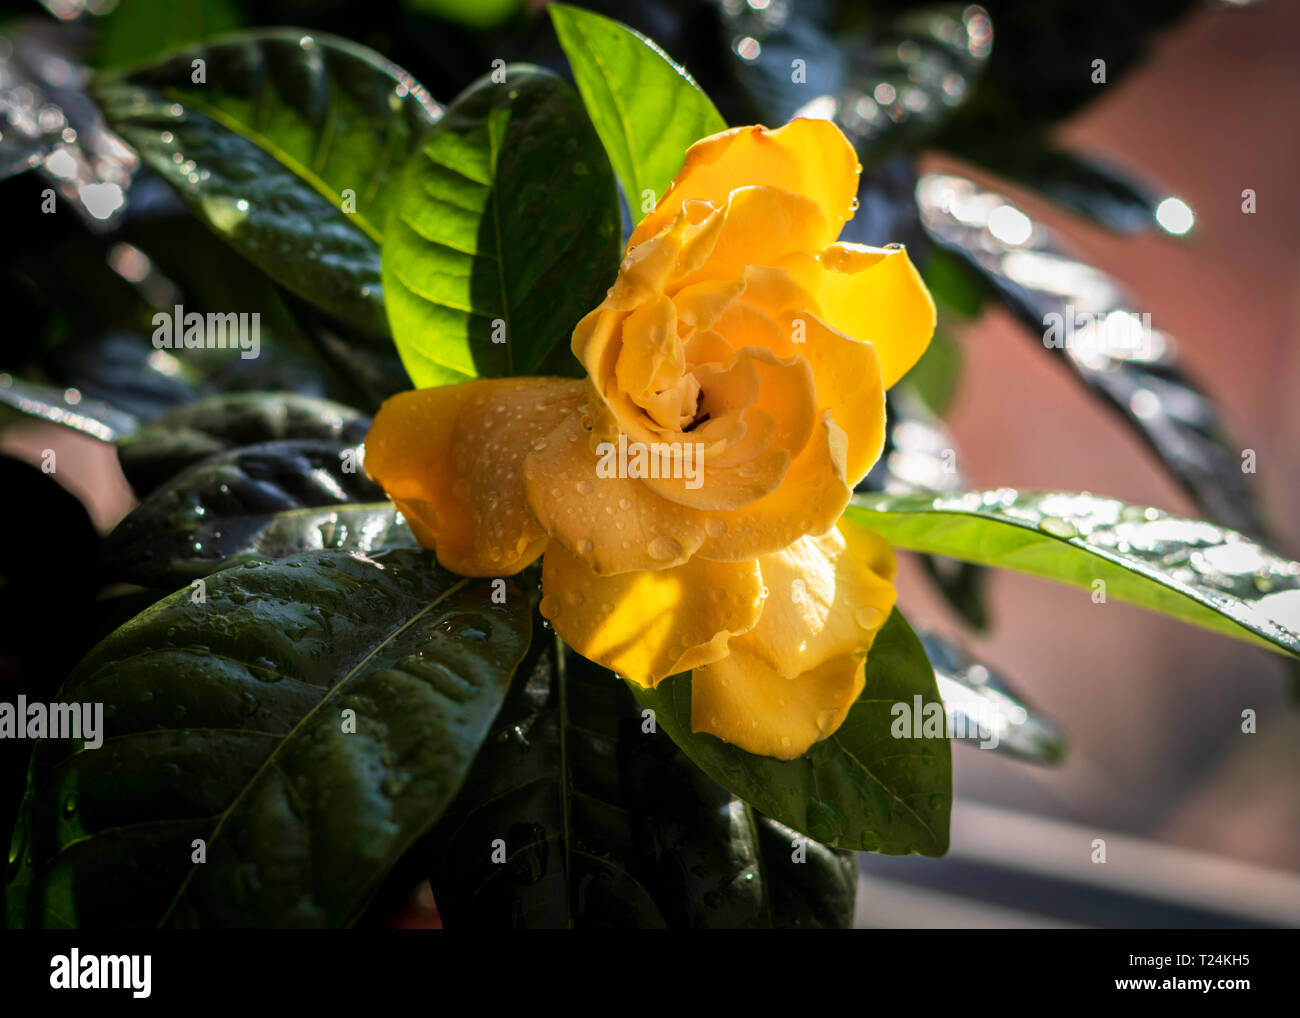 Rhododendron yellow flower in pot at home near the window Stock Photo